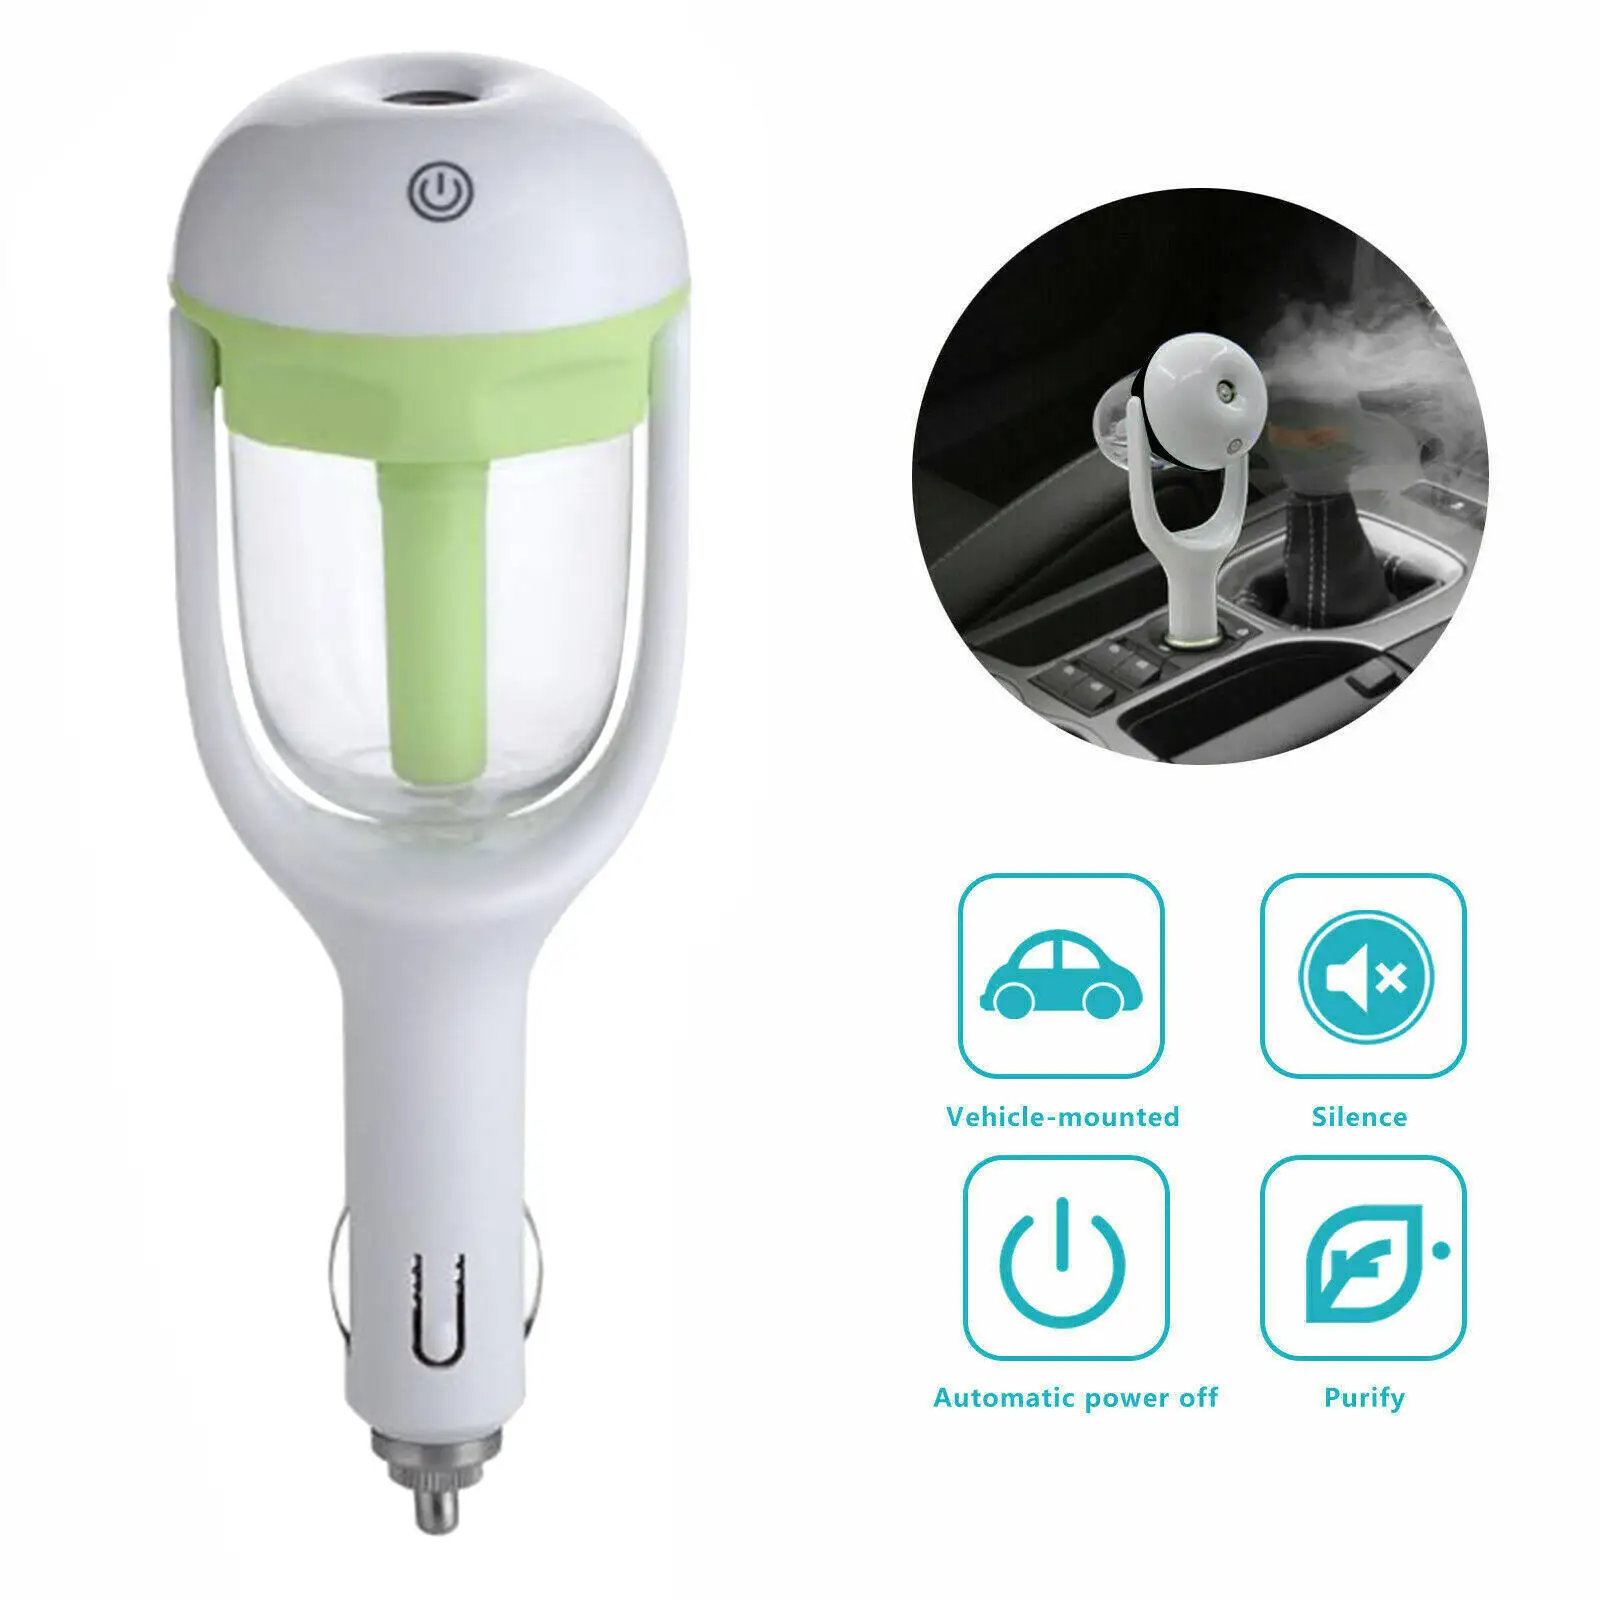 12V Car Air freshener Mini Car Humidifier Air Purifier Aroma and Essential oil diffuser car Aromatherapy Mist Maker